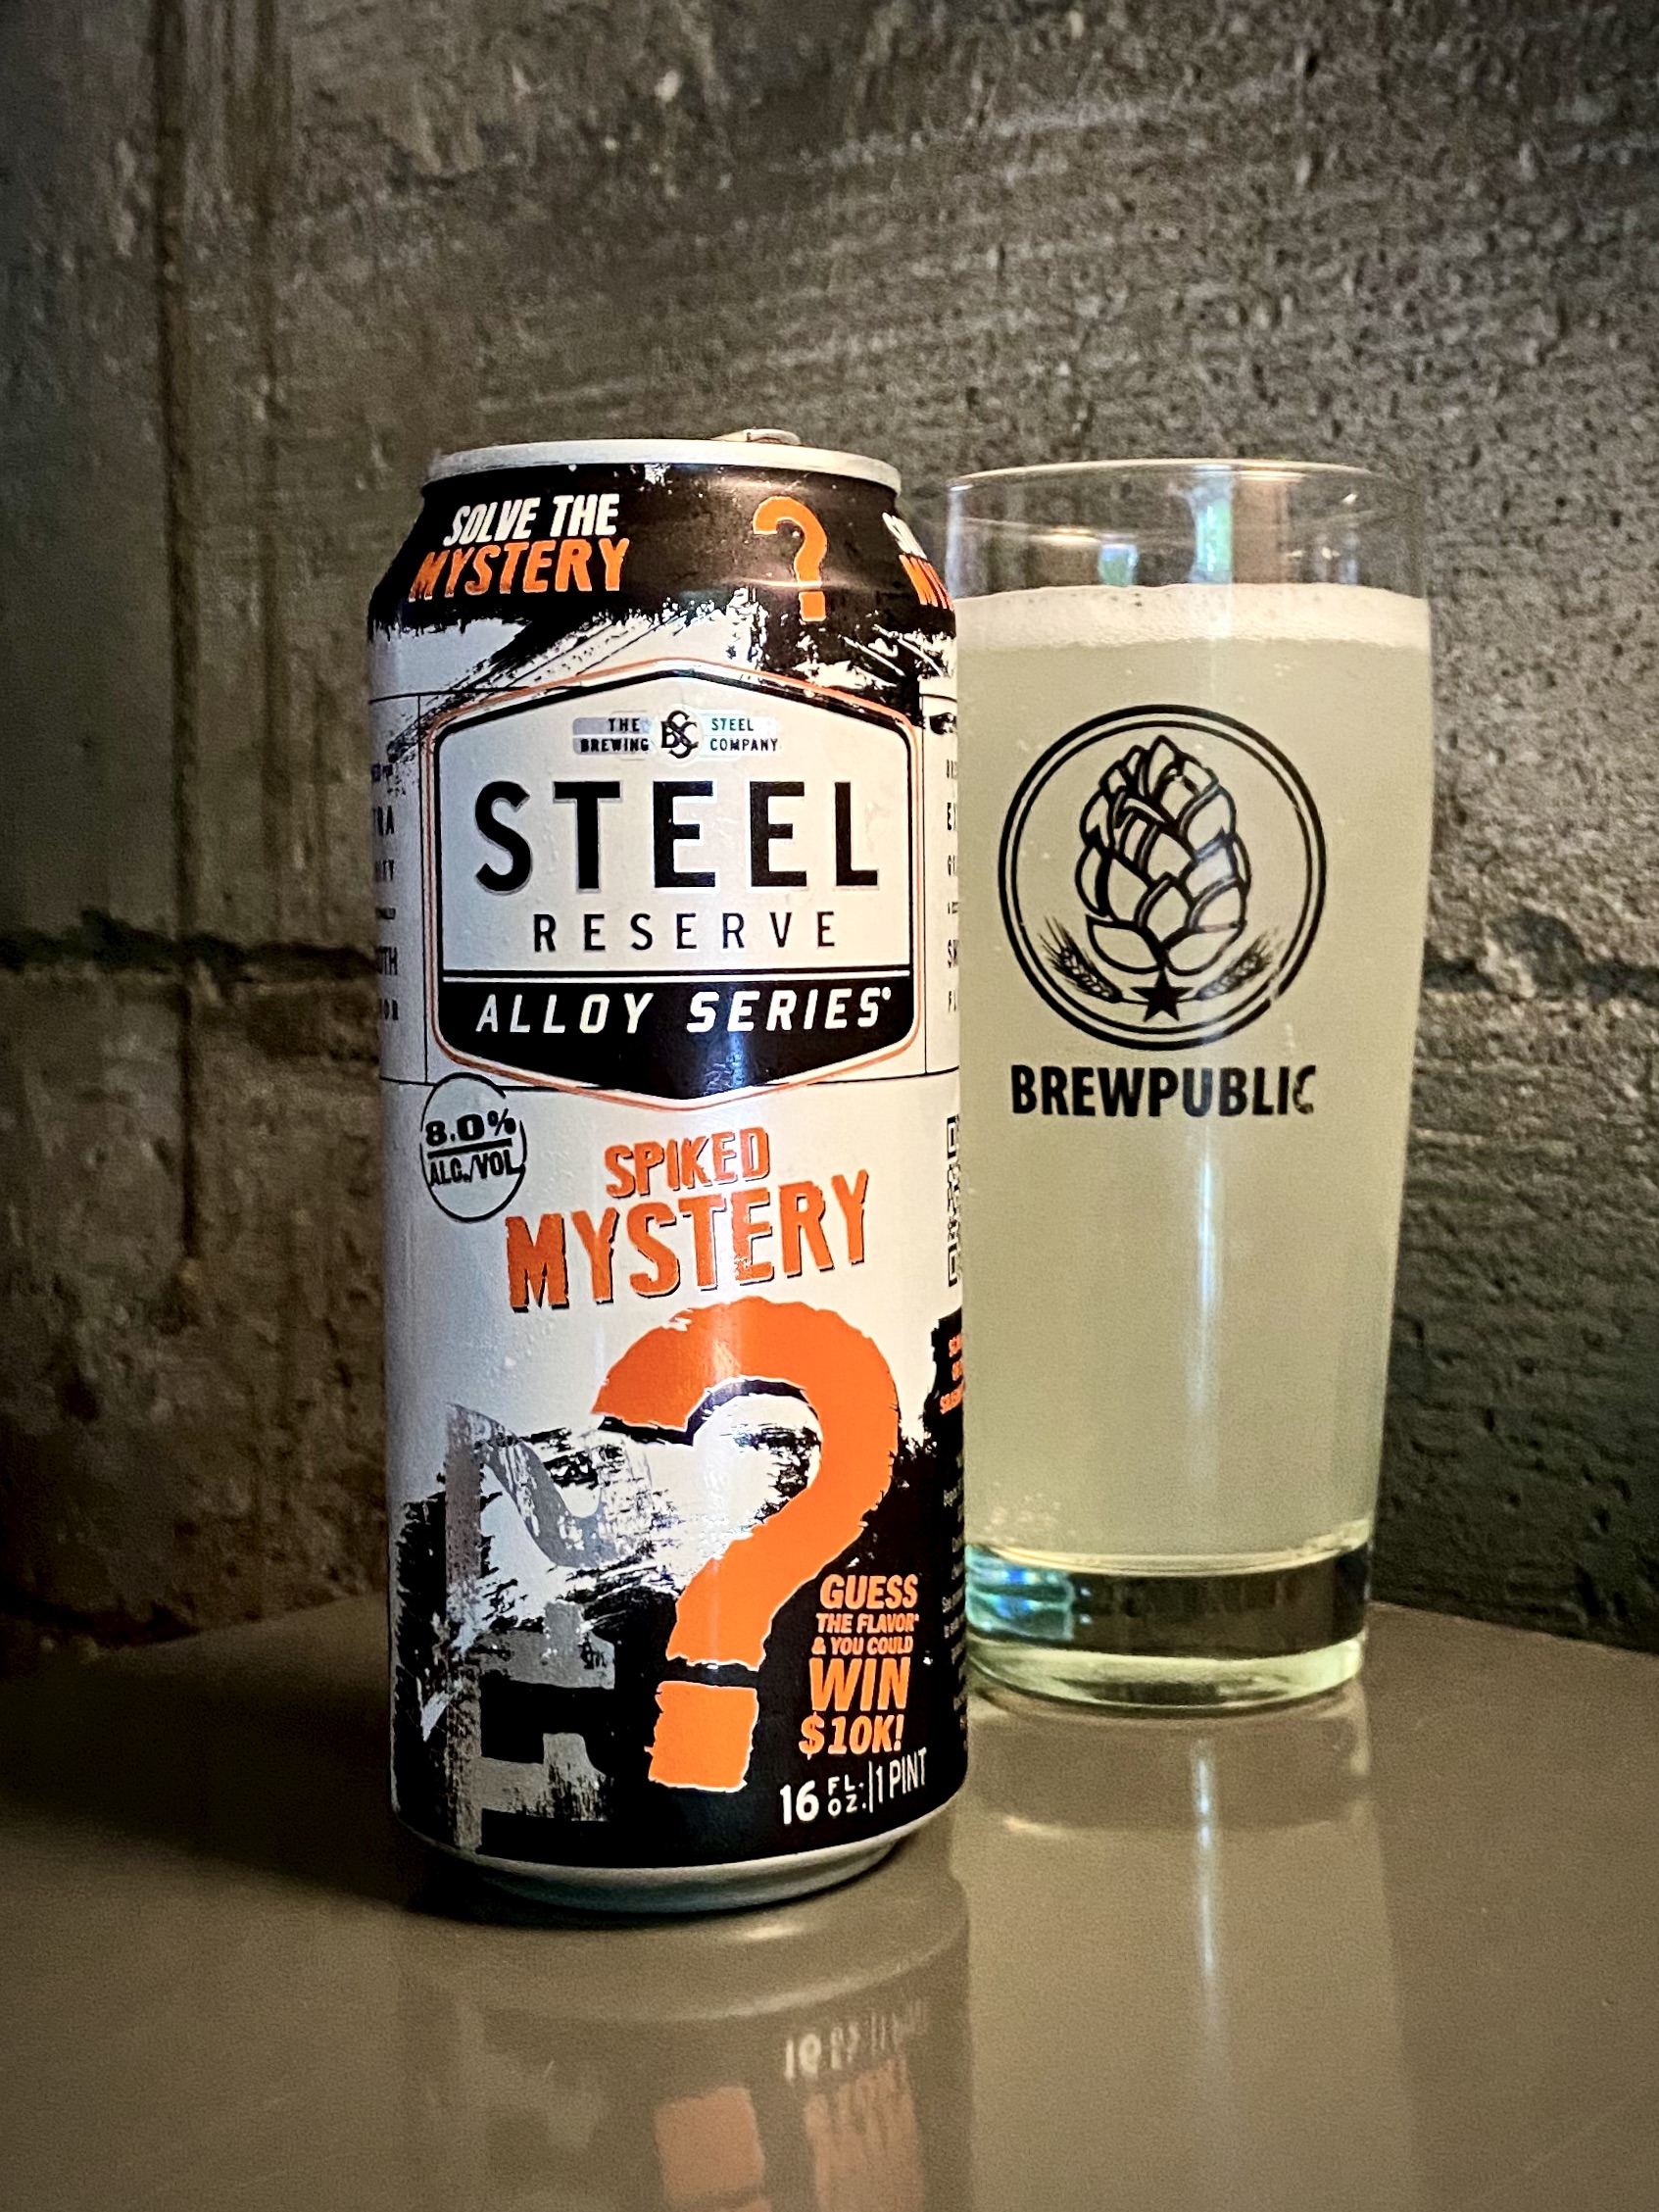 Solve the Mystery with Steel Reserve and you win $10,000!